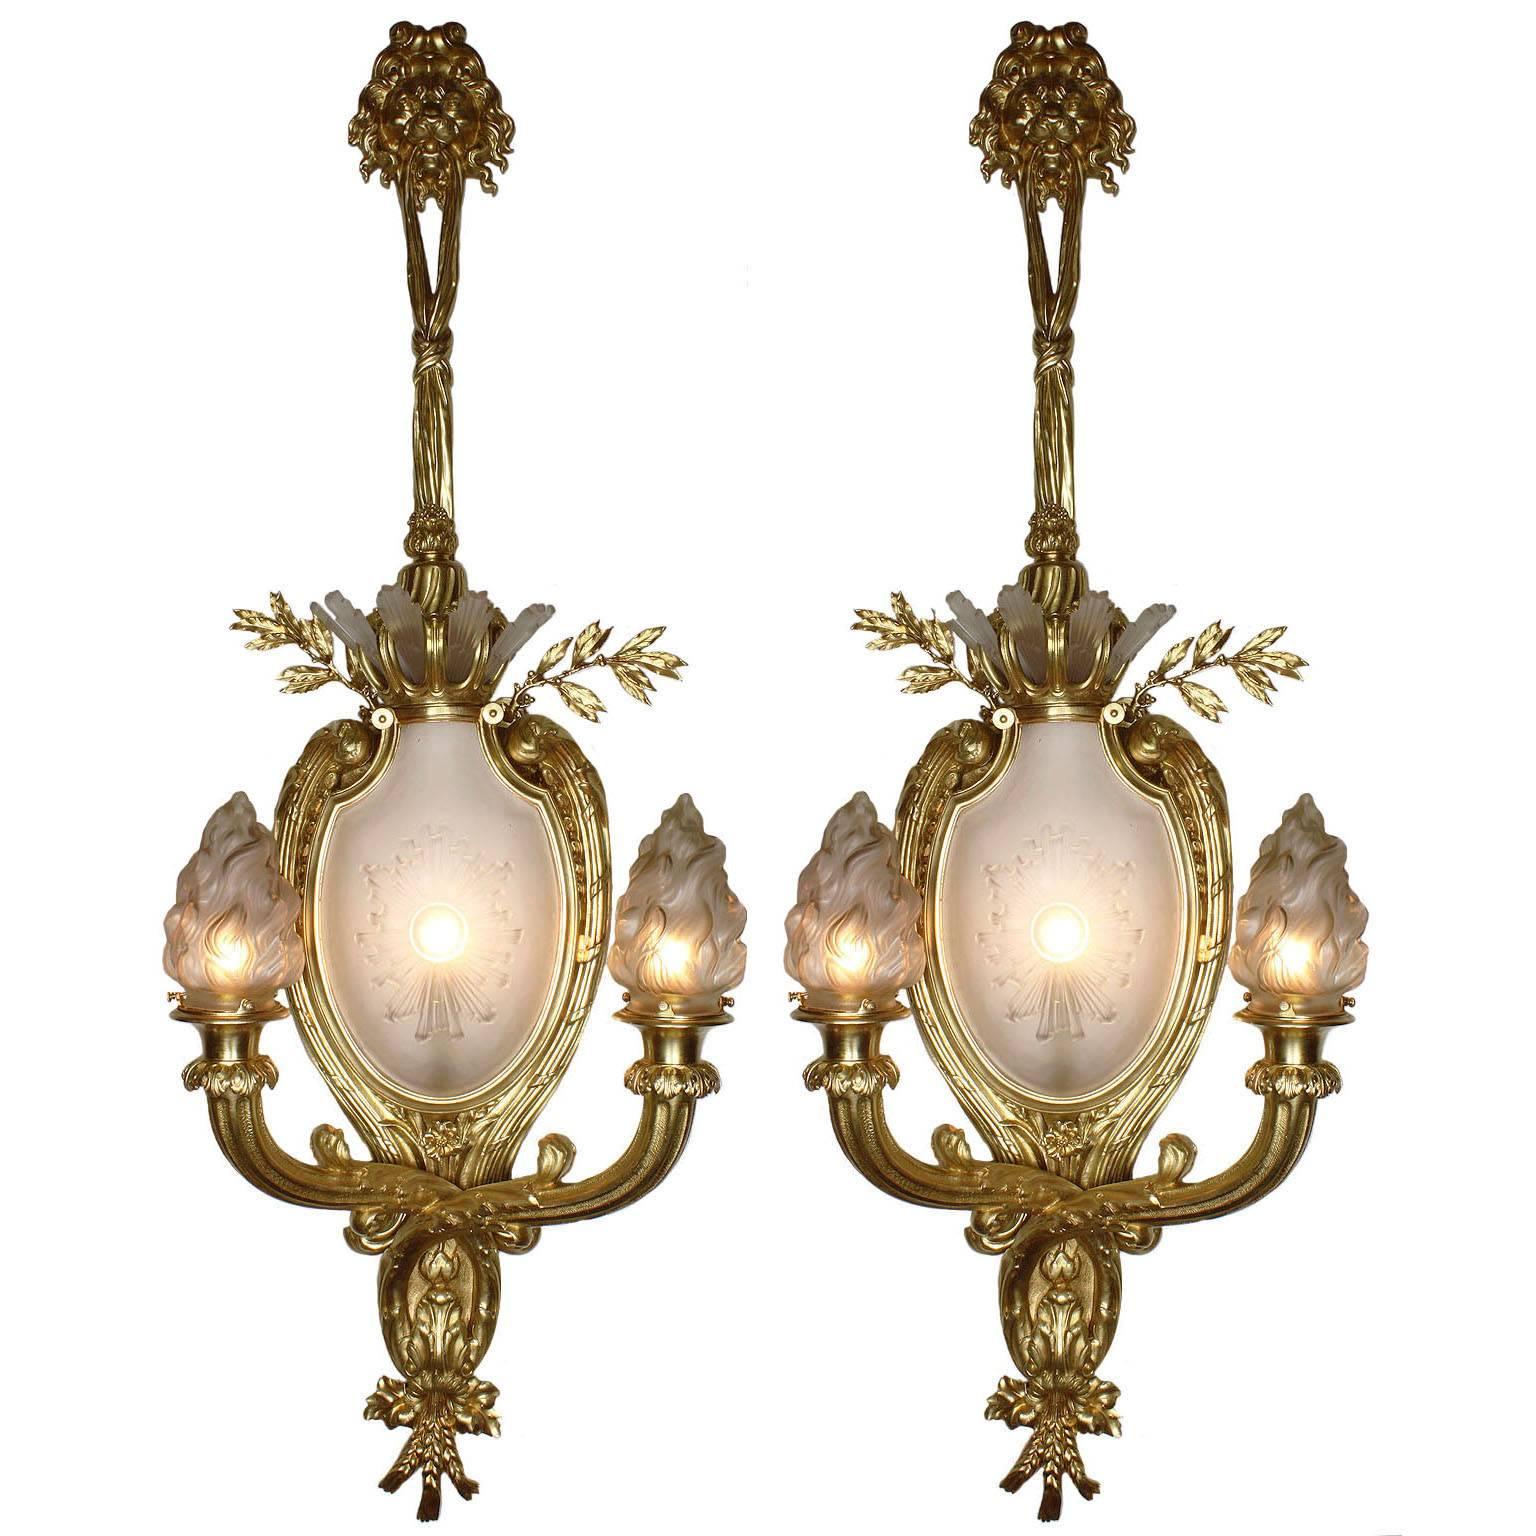 A Palatial pair of French 19th-20th century Louis XV style figural gilt-bronze and frosted molded-glass two-light wall light luminéres. Each sconce centered with an ovoid frosted molded glass plaque edged with a sun-burst design below six frosted